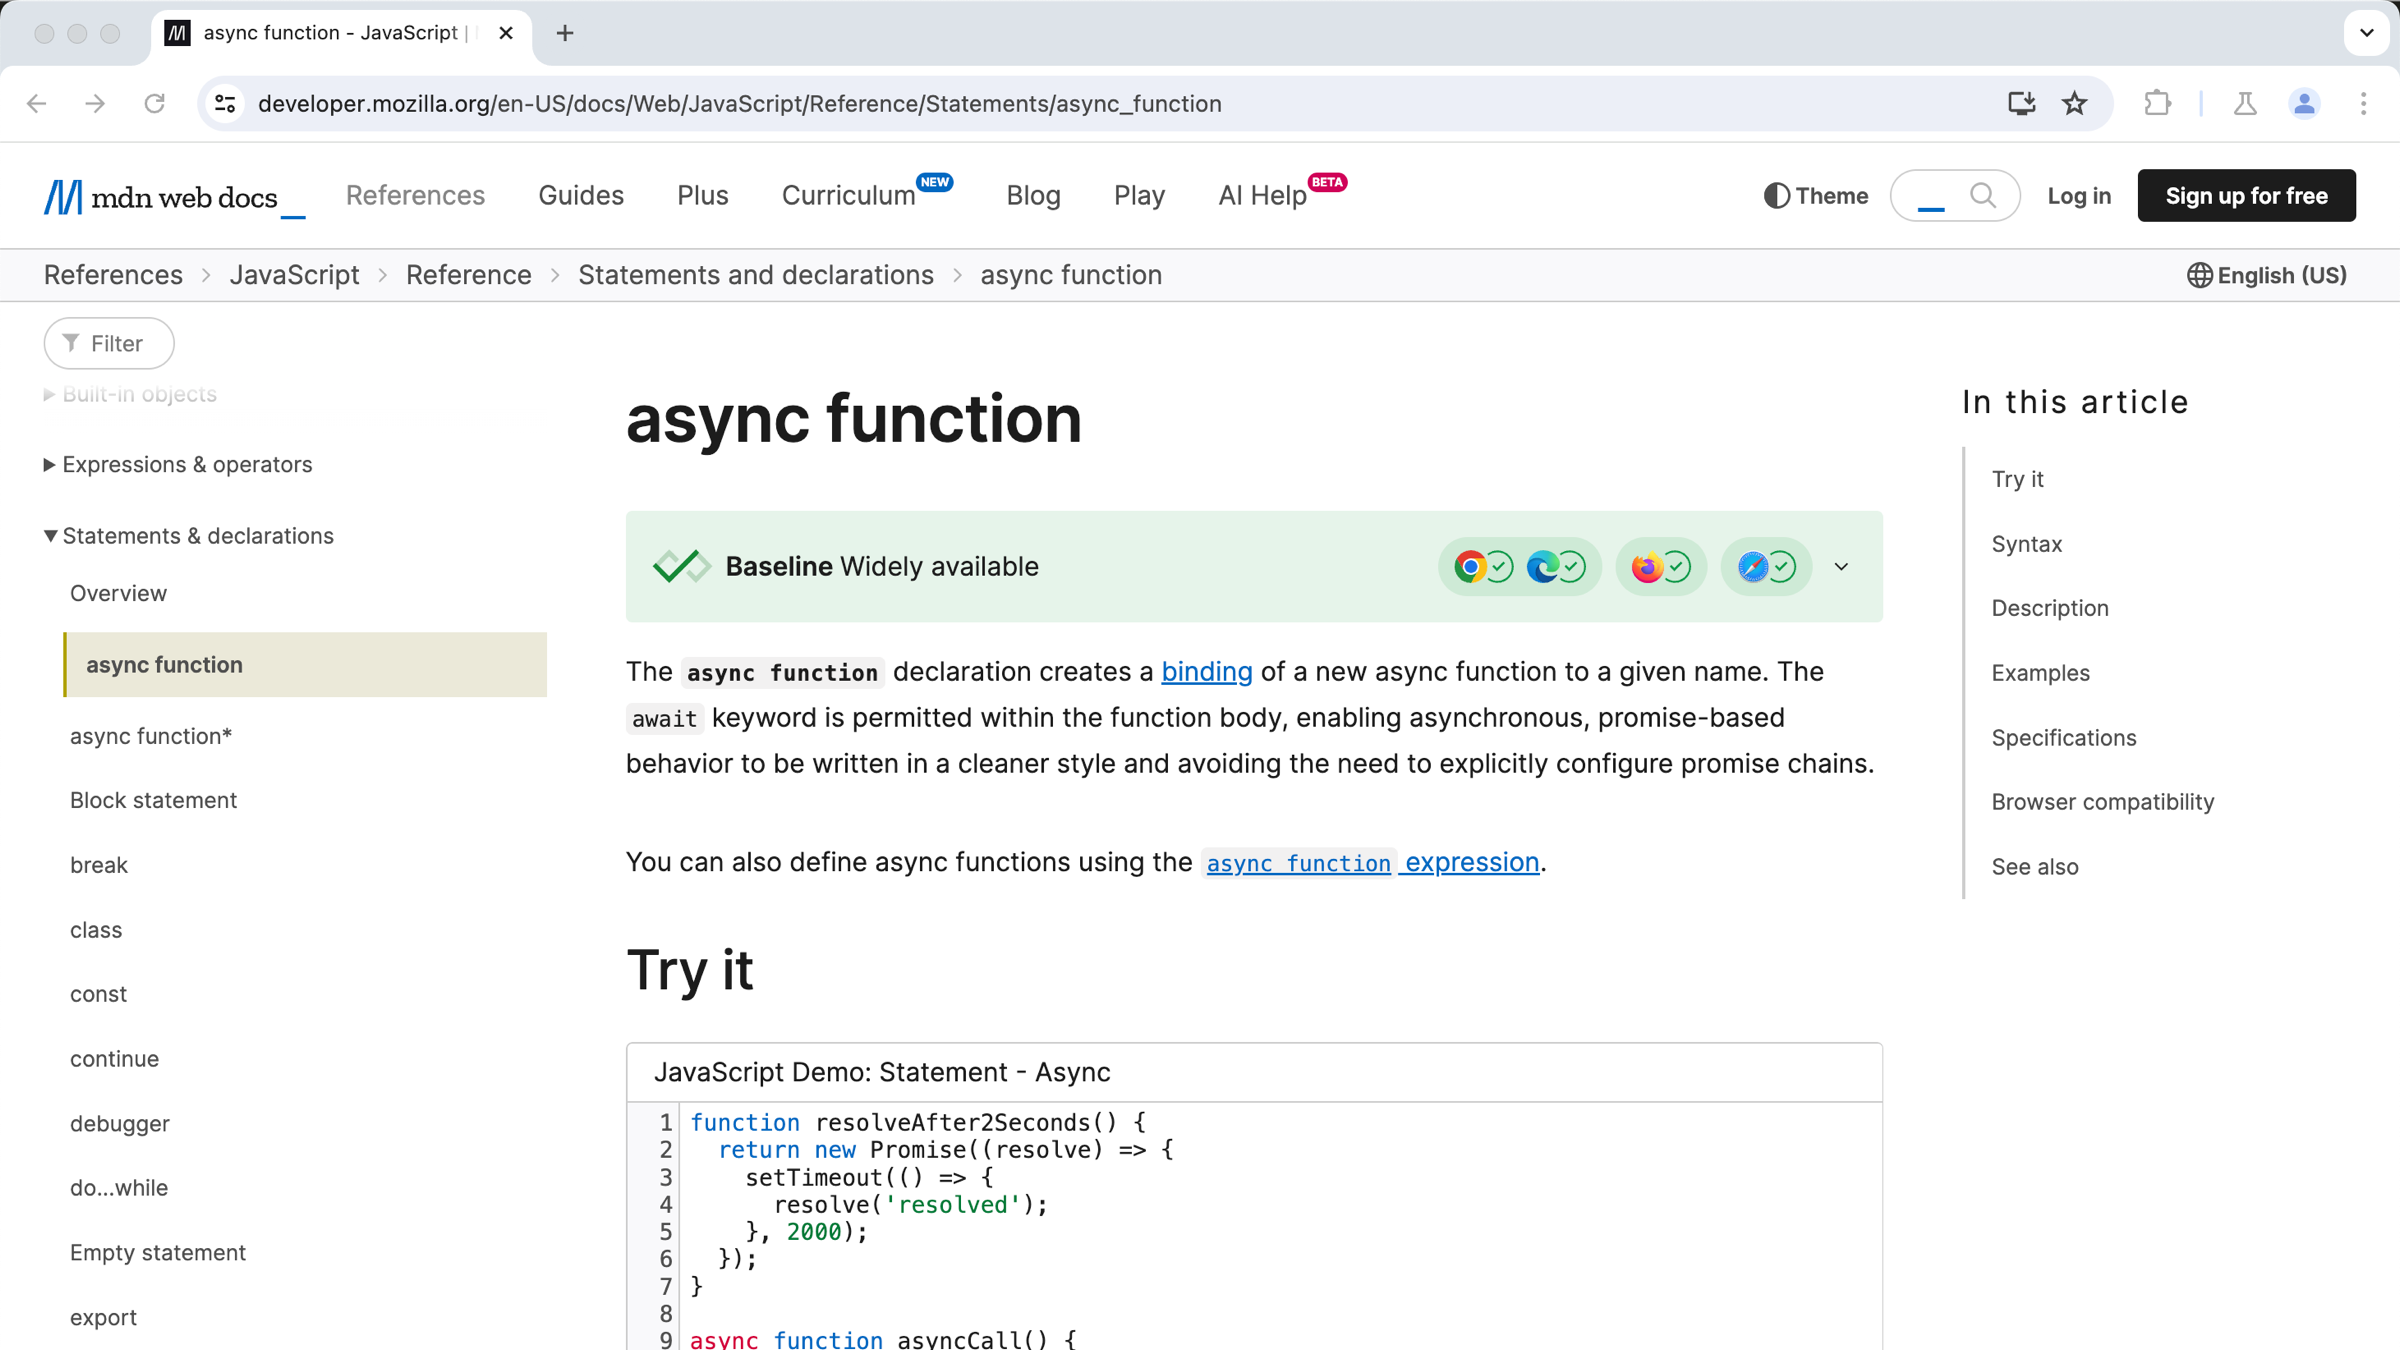 A screenshot of the page for the async function on MDN. The green checkmark for Baseline shows this feature is widely available.